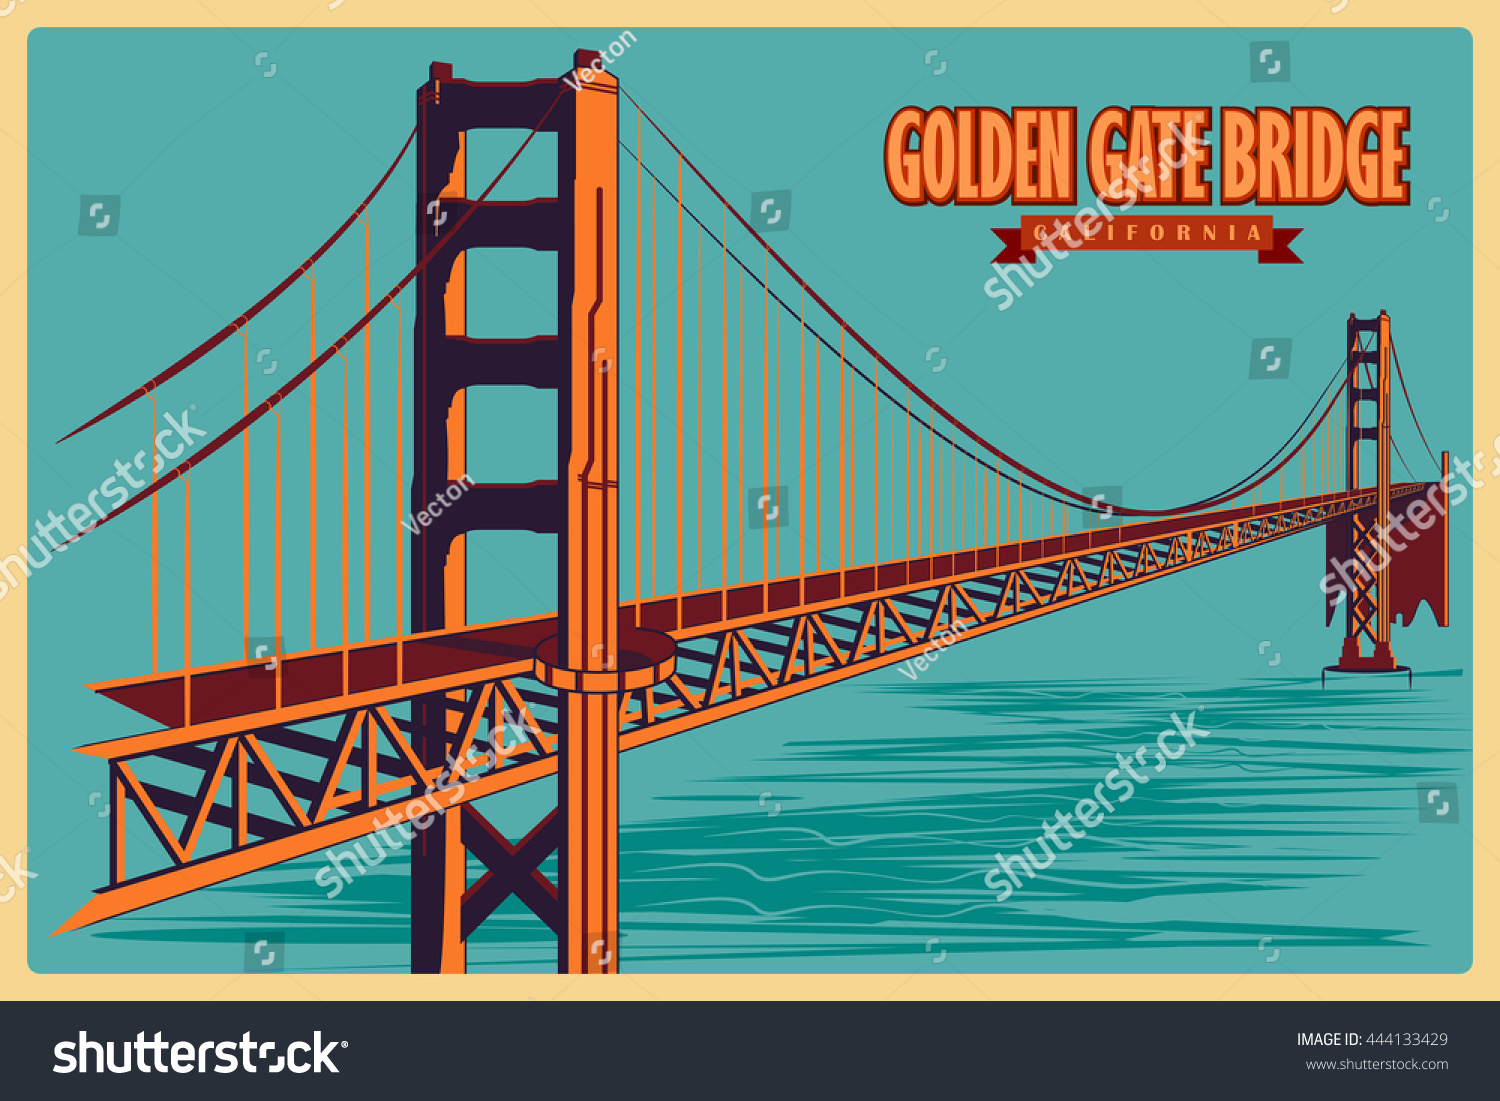 6137.Poster.California.golden.gate.hollywood.bowl.sailboats.Decoration.Graphic 